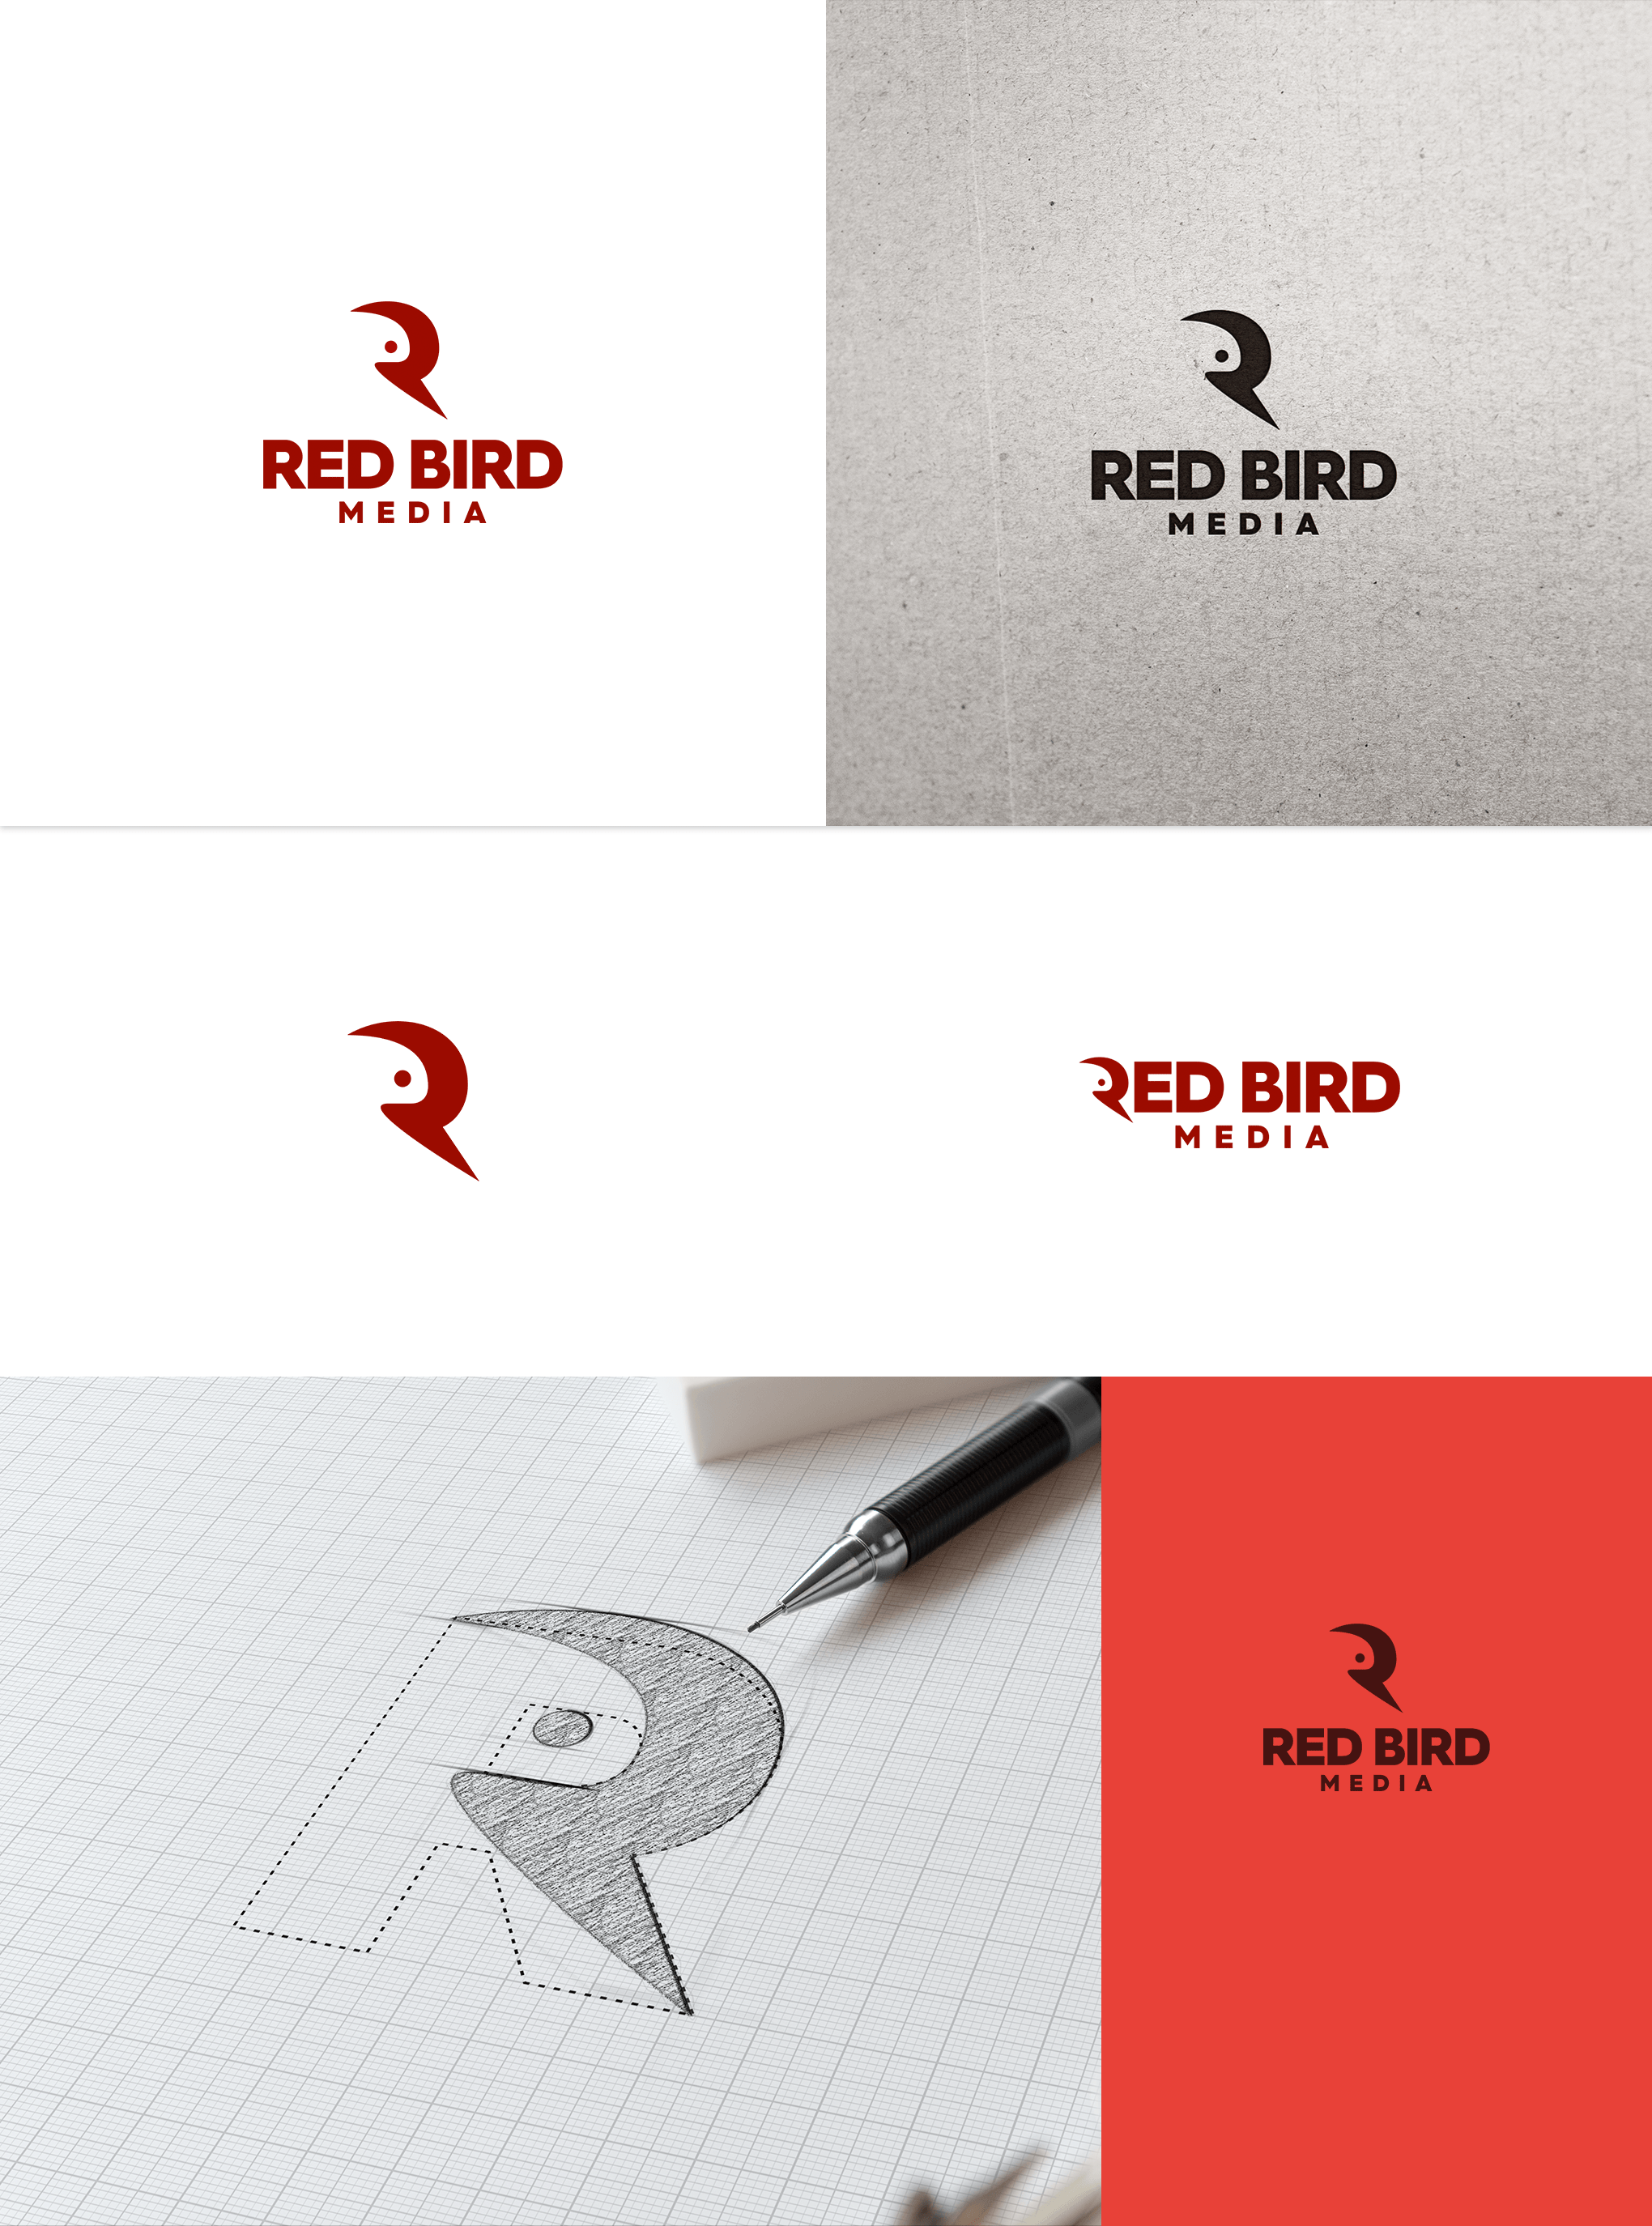 Entry Logo - Can I present multiple logo variations in a single Contest entry ...